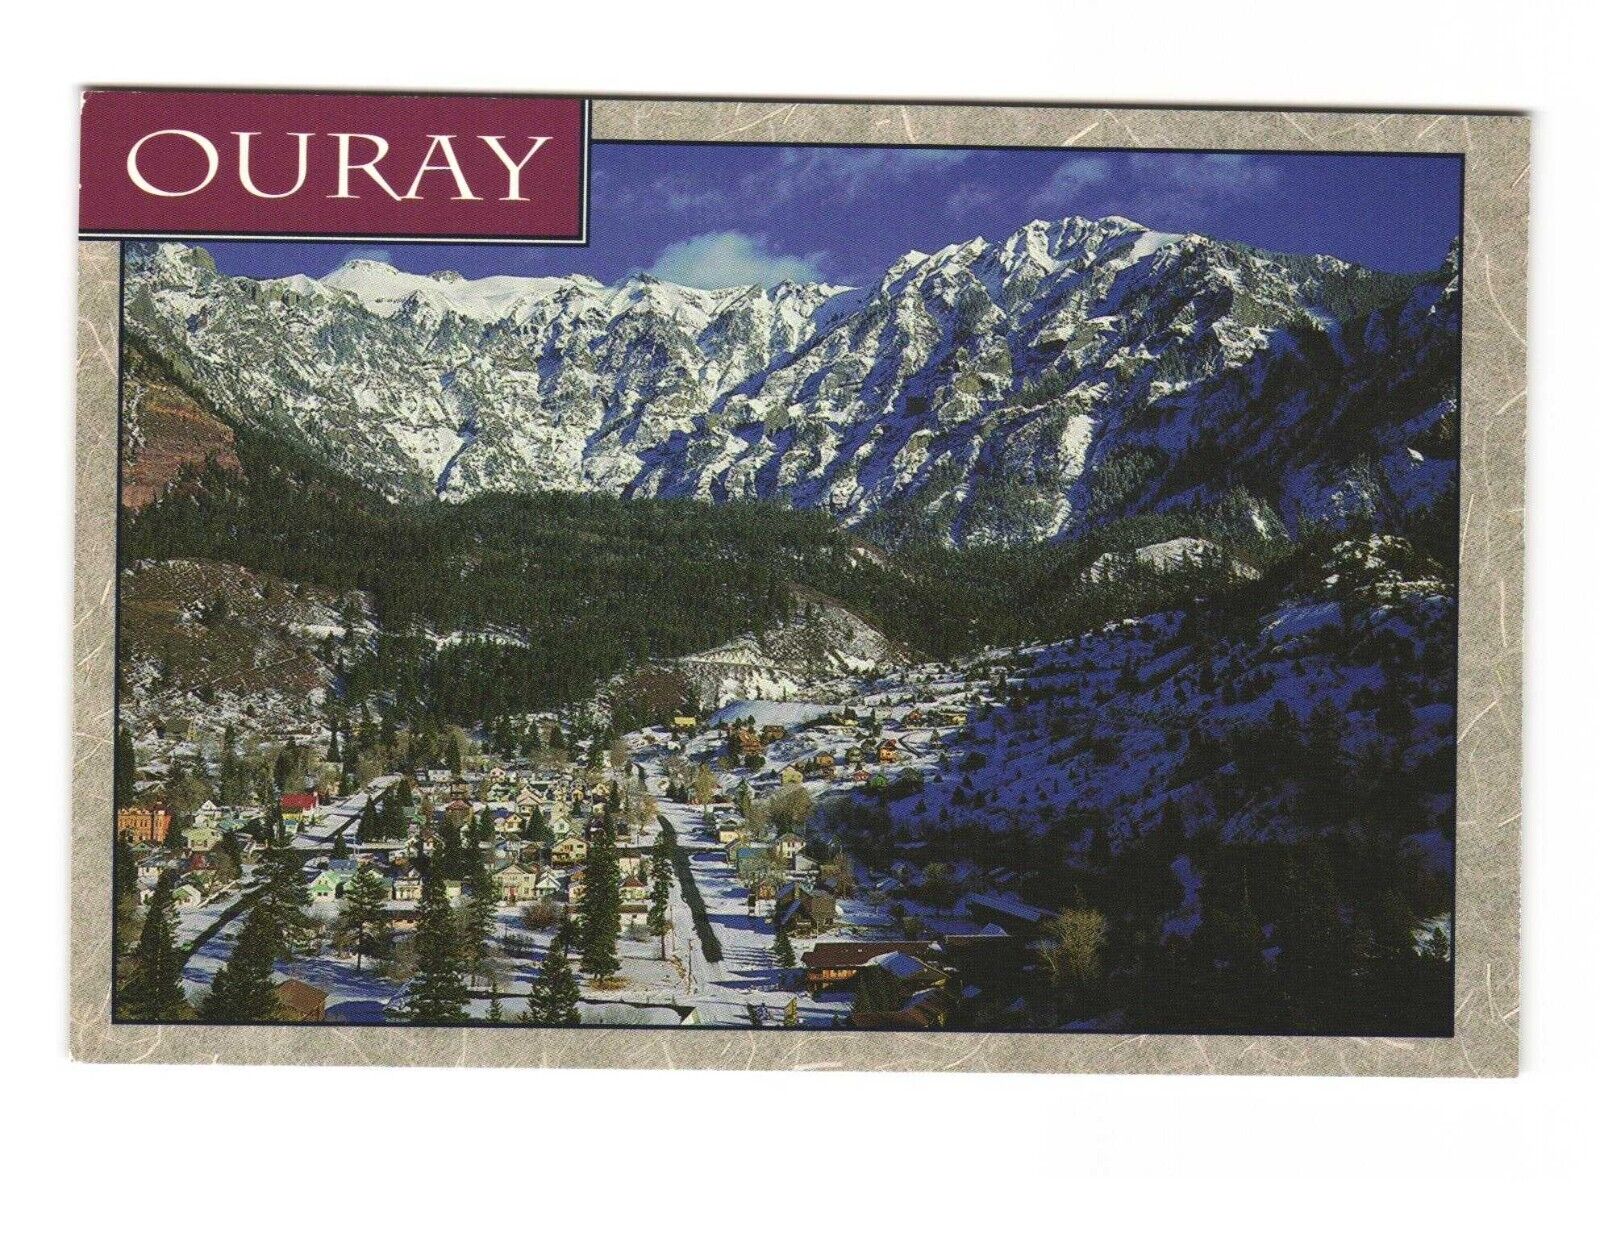 Picturesque Ouray, Colorado with the Amphitheater above Postcard Unposted 4x6